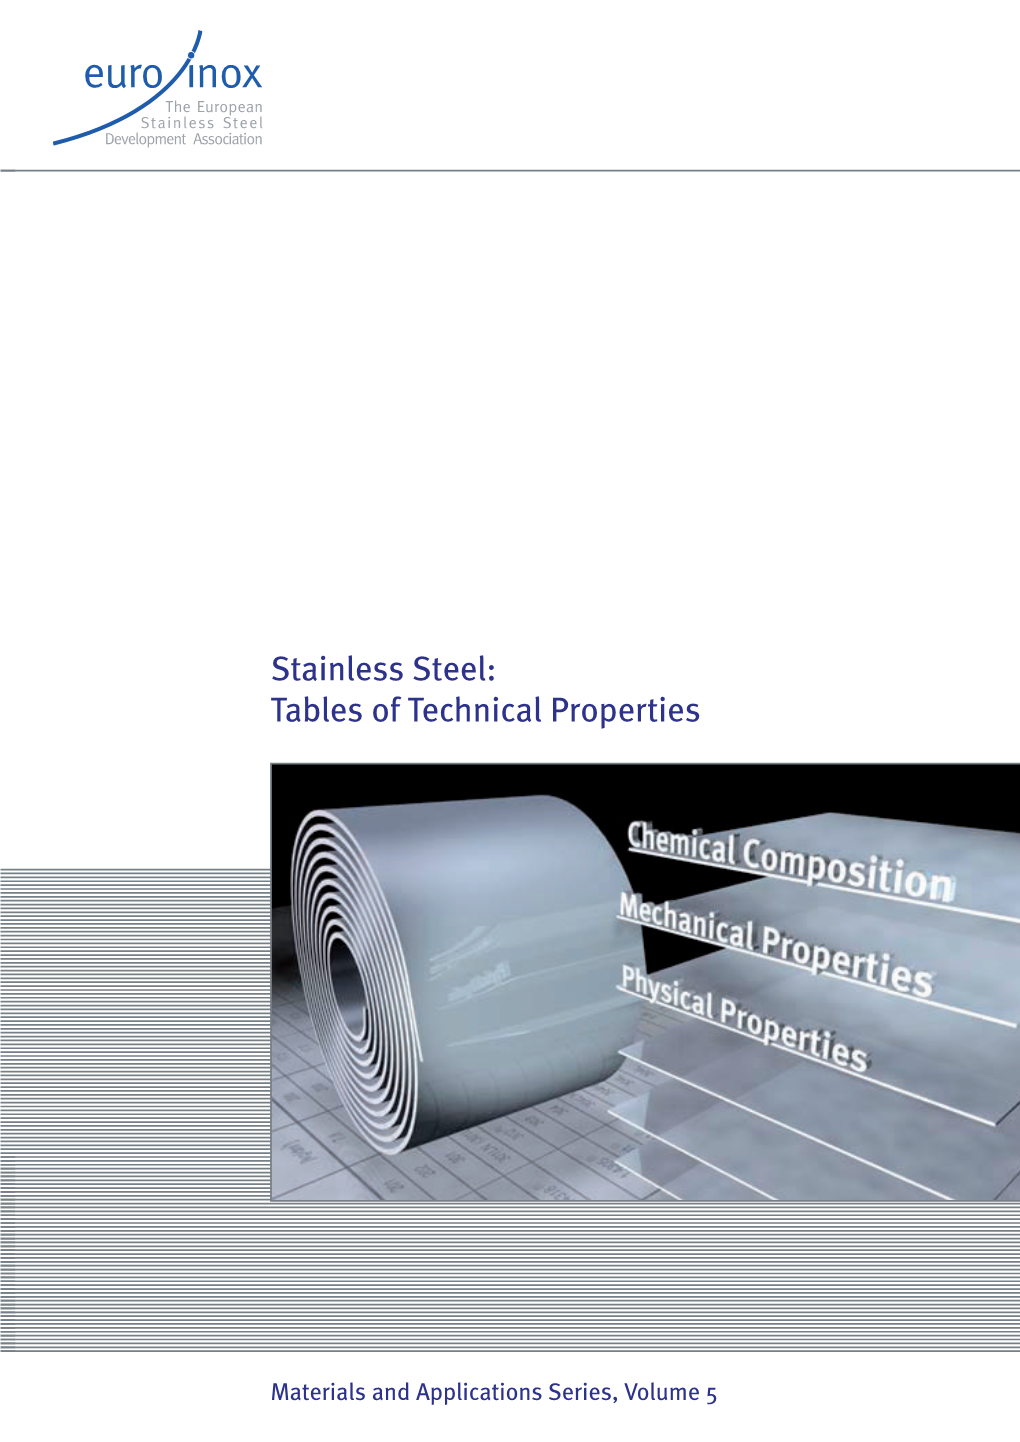 Stainless Steel: Tables of Technical Properties